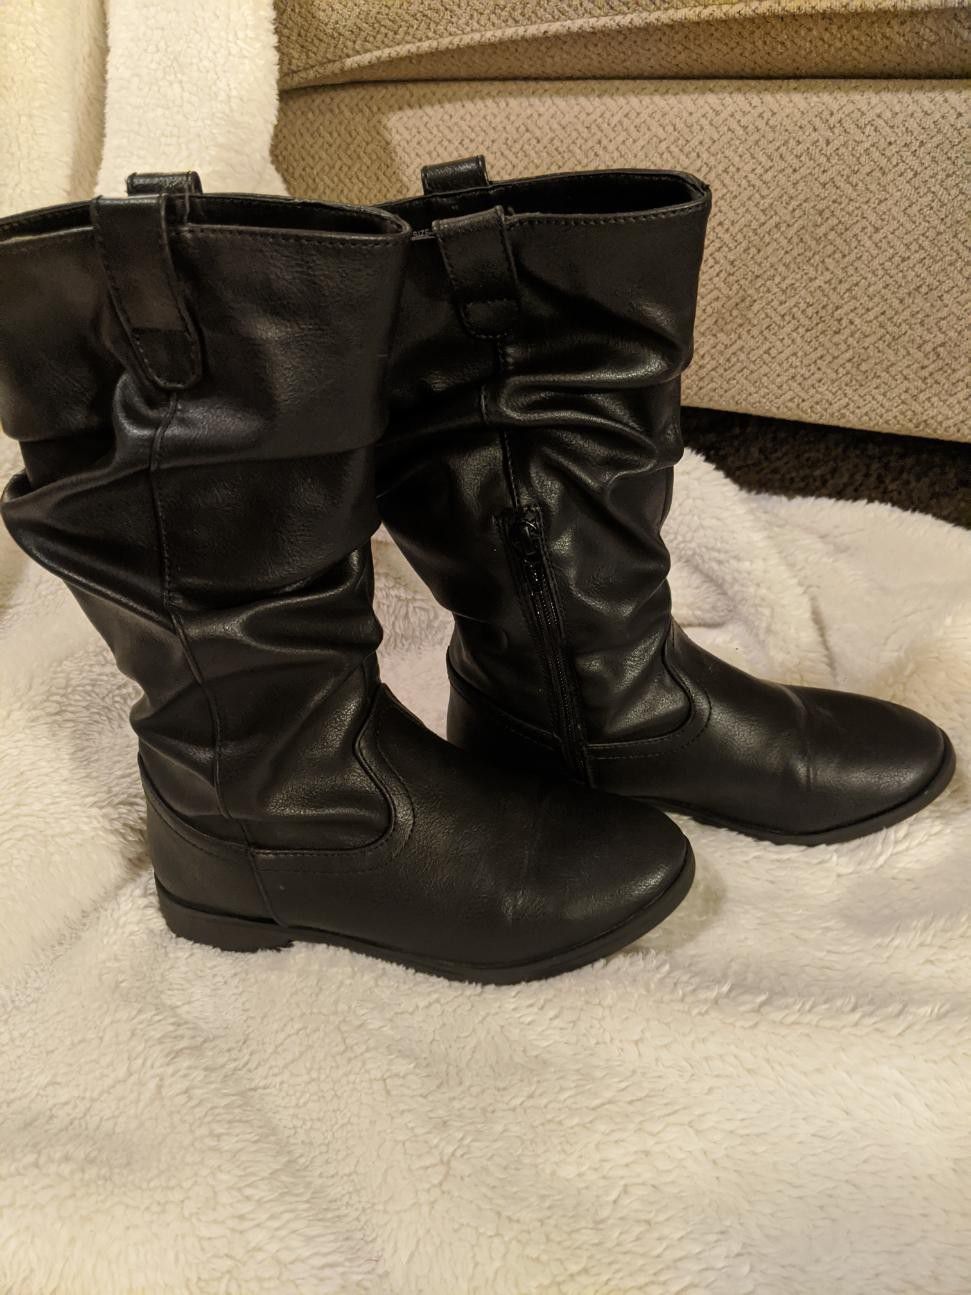 Girls size 2 children's place boots*like NEW*